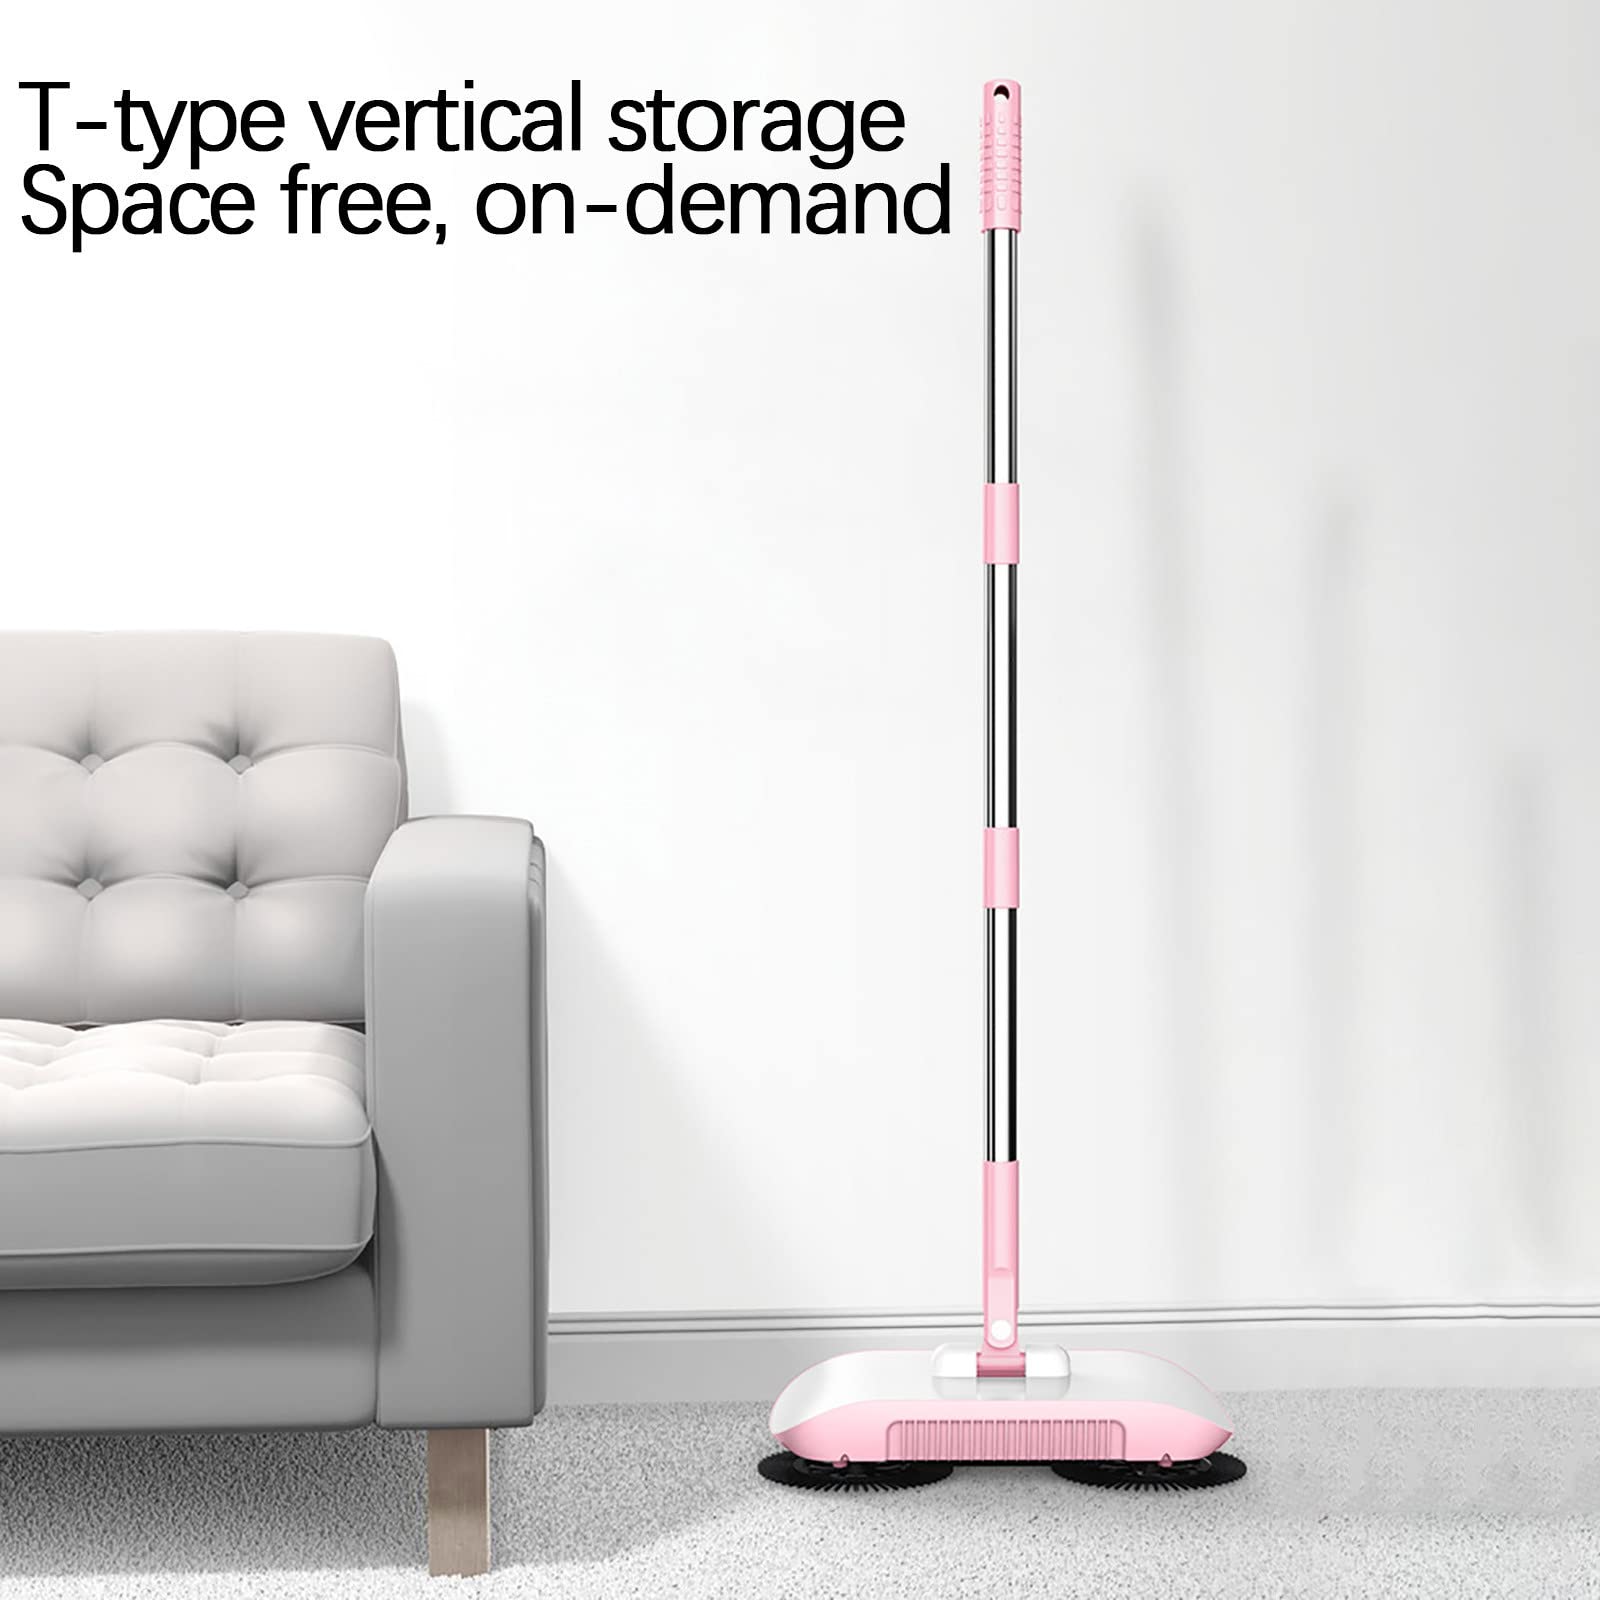 Sweeper 3-in-1 Mops for Floor Cleaning, Hand Push Sweeper Household Lazy Sweeper, Dry and Wet Multi Surface Floor Cleaner Lightweight - Ideal for Pet Hair&Crumby Messes (Pink)